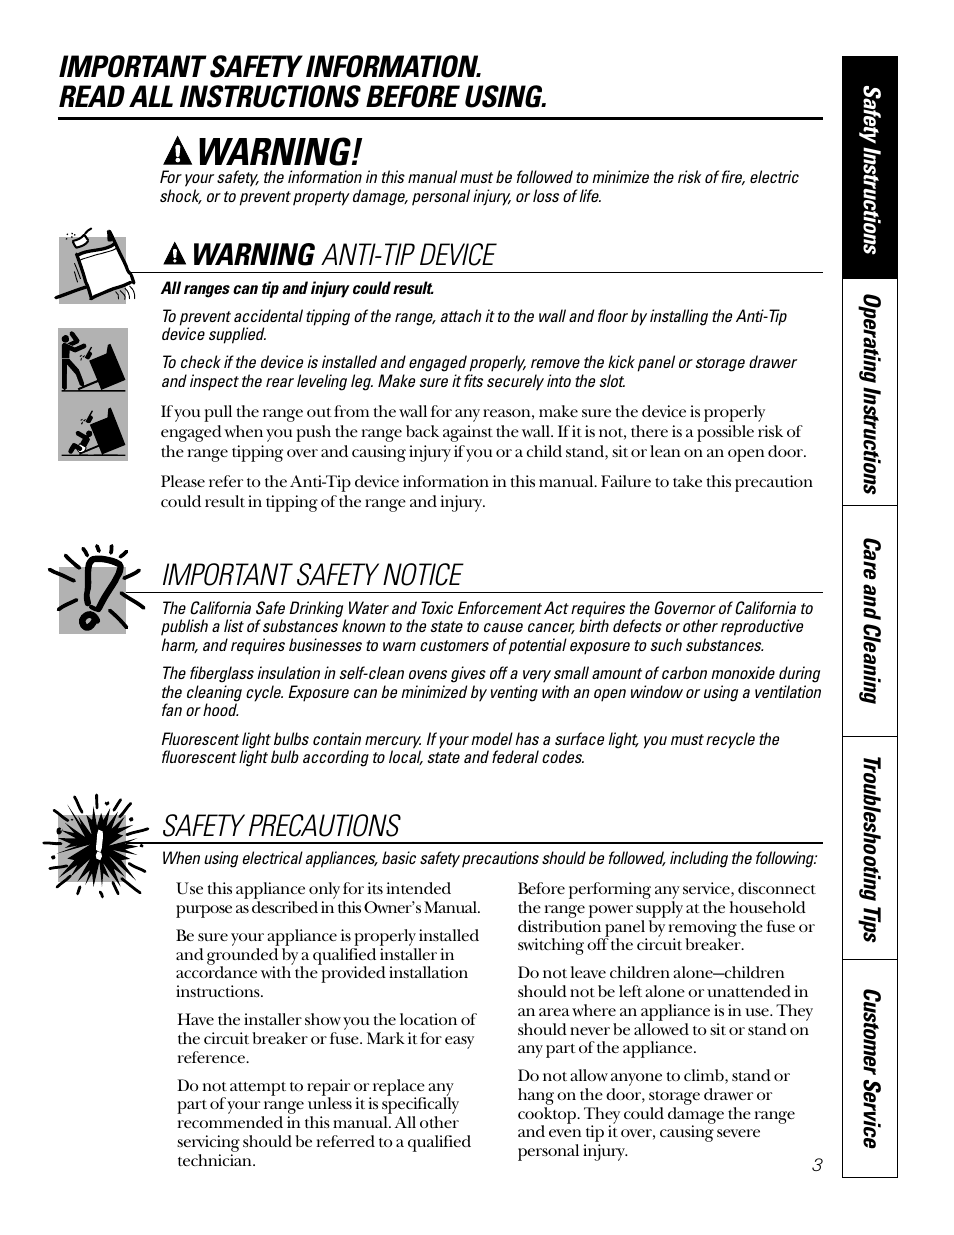 Anti-tip device, Safety precautions, Safety precautions , 4 | Warning, Warning anti-tip device important safety notice | Sharp JB940 User Manual | Page 3 / 40